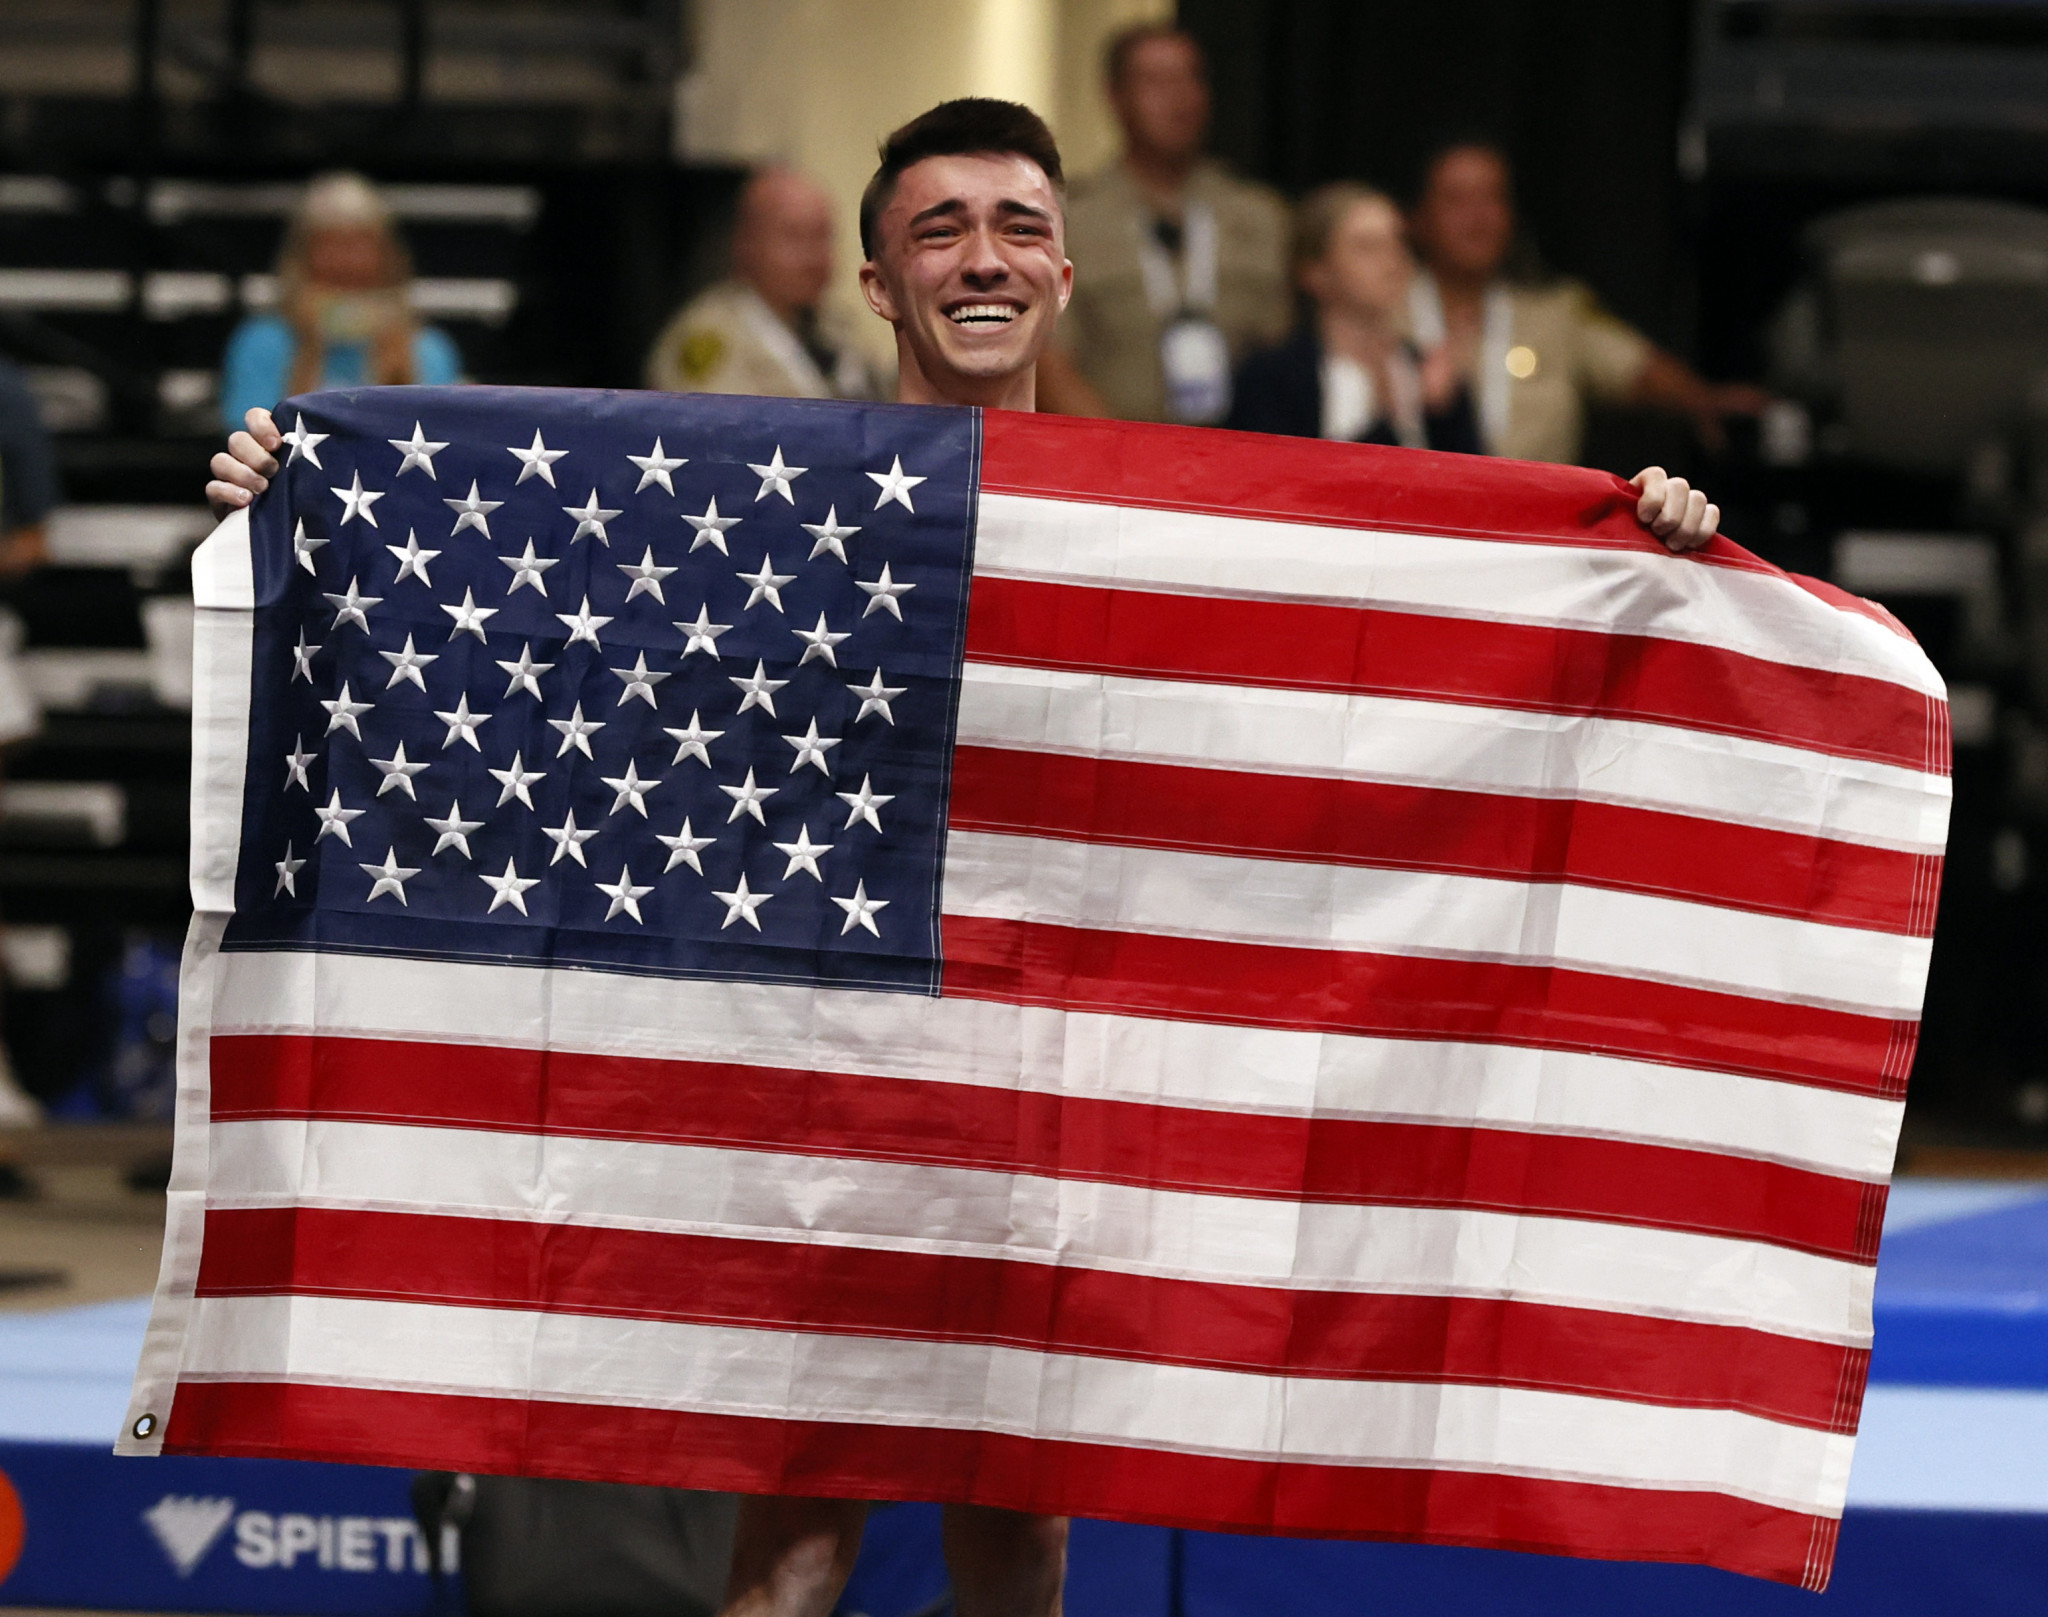 Kaden Brown produced a winning performance in the men's tumbling final for the United States hosts ©The World Games 2022